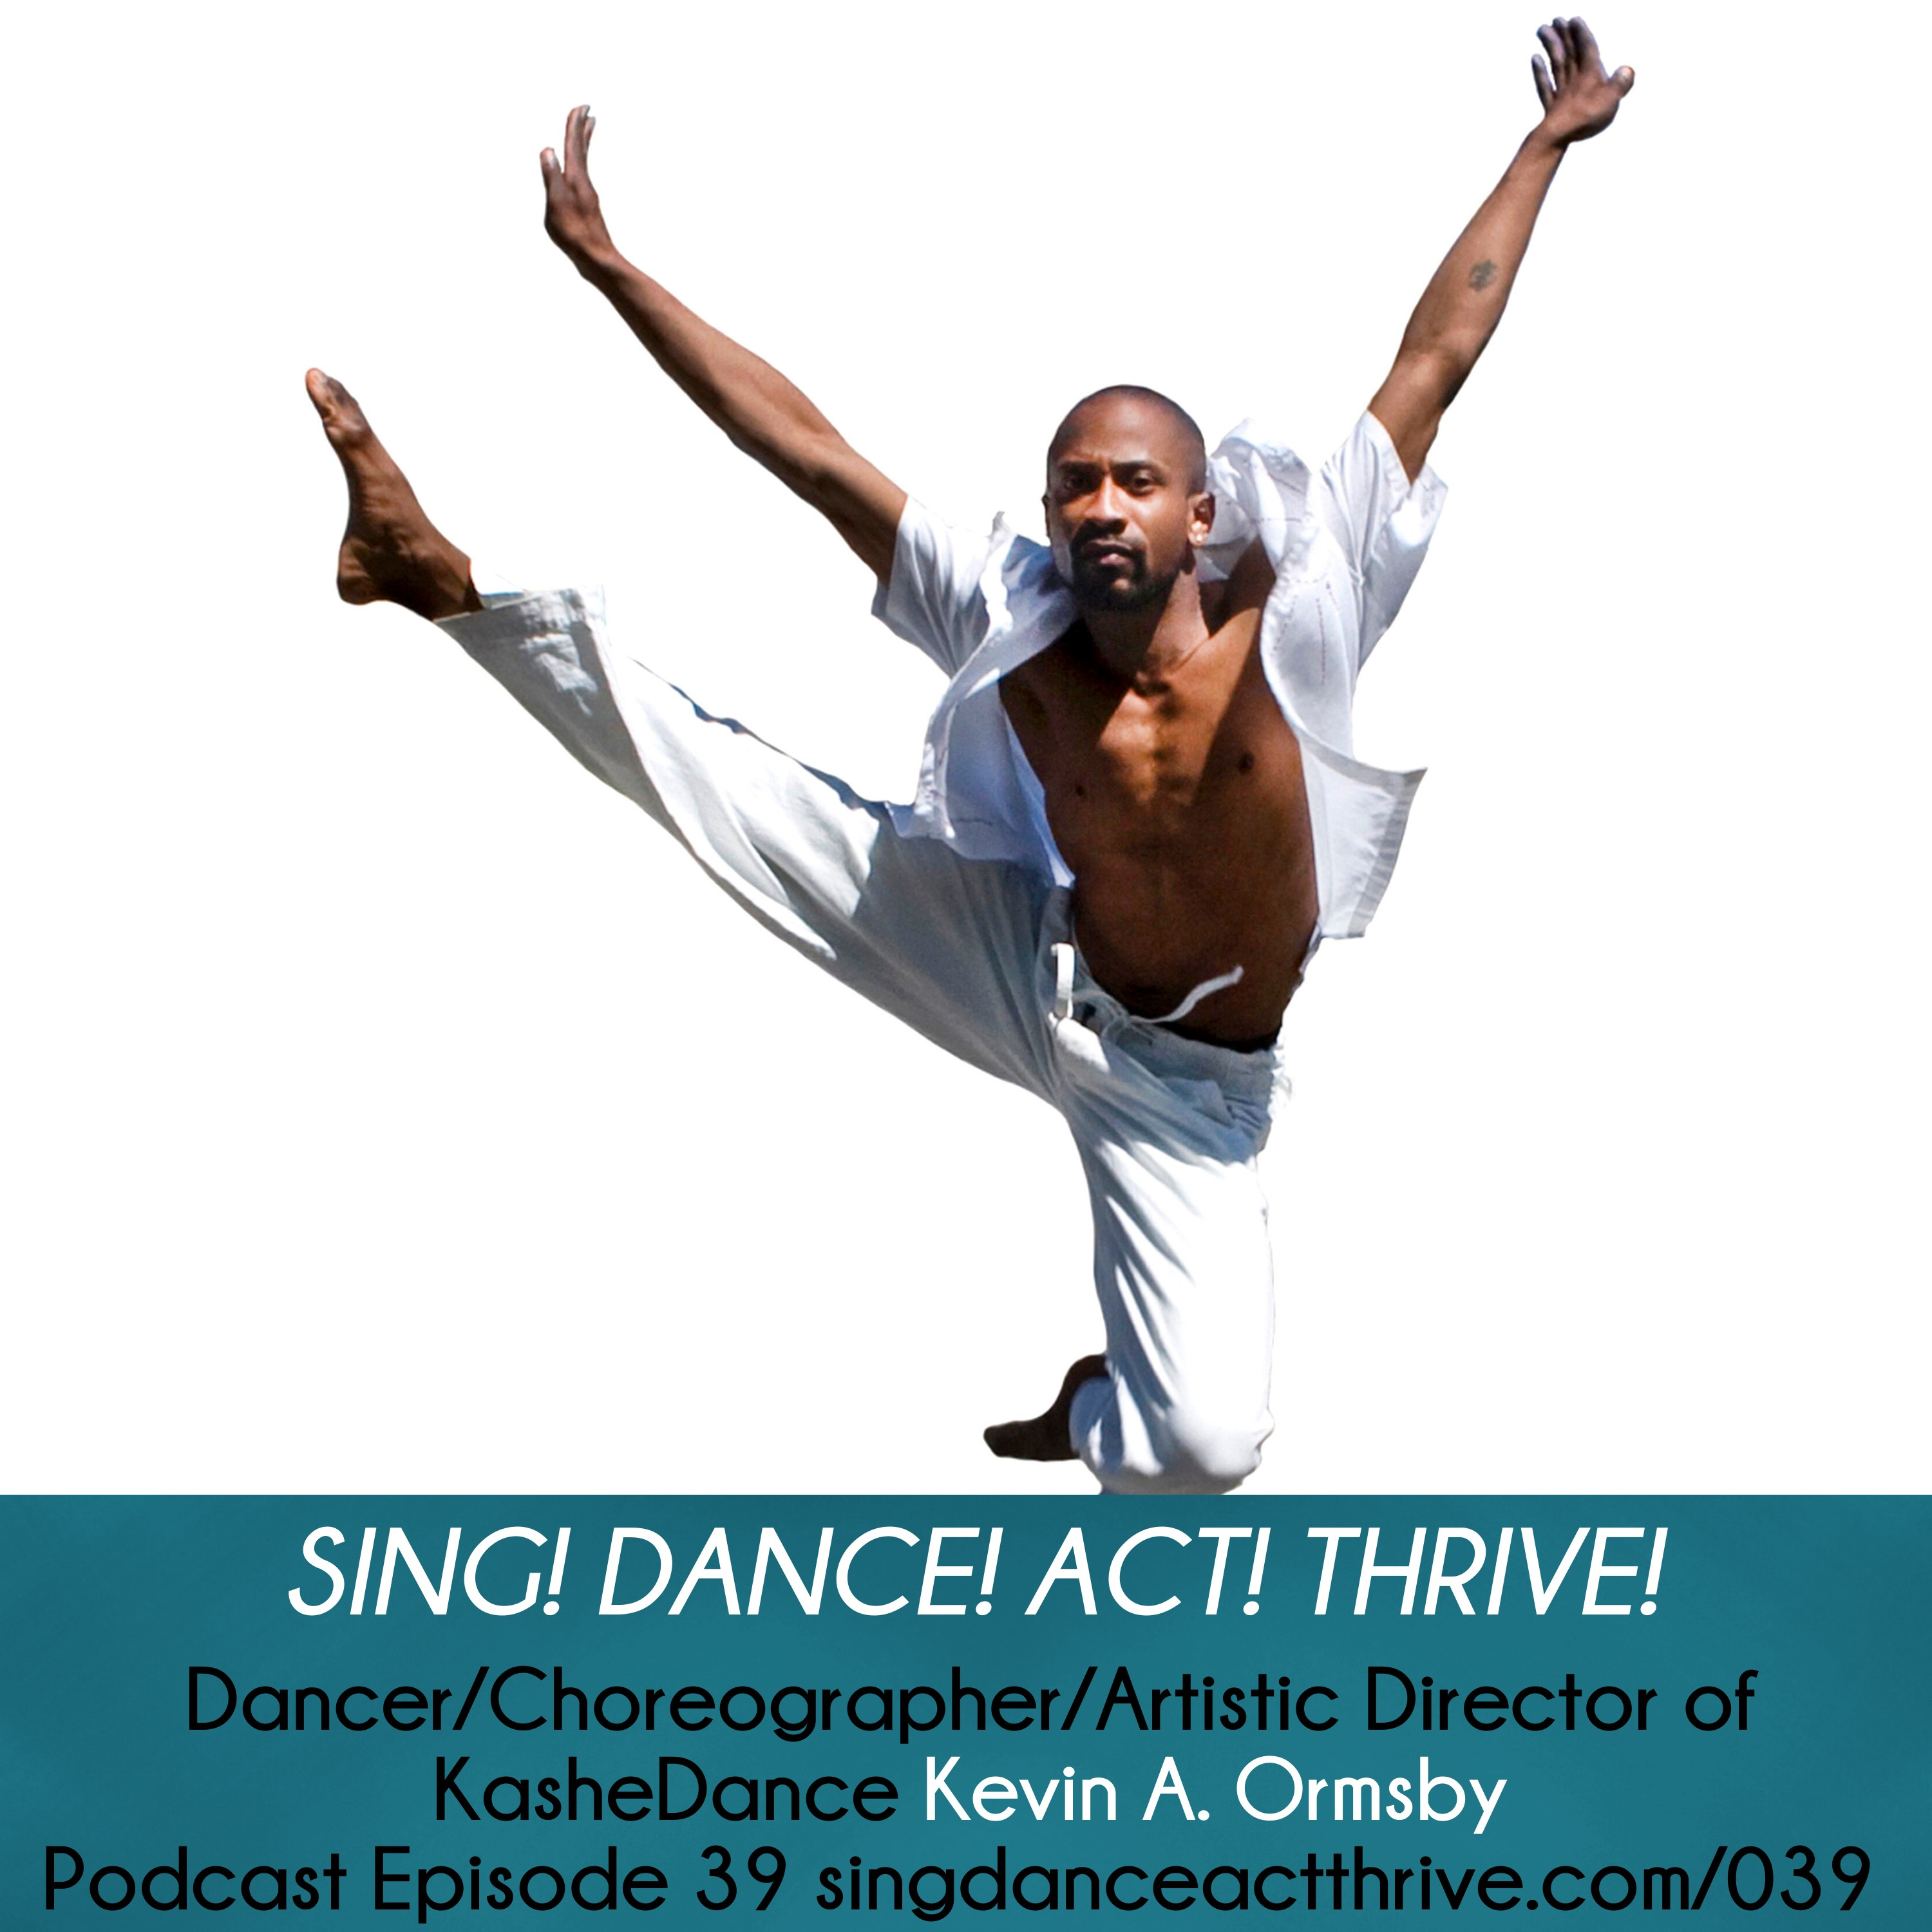 Kevin A. Ormsby: Dancer, Choreographer, Artistic Director of KasheDance